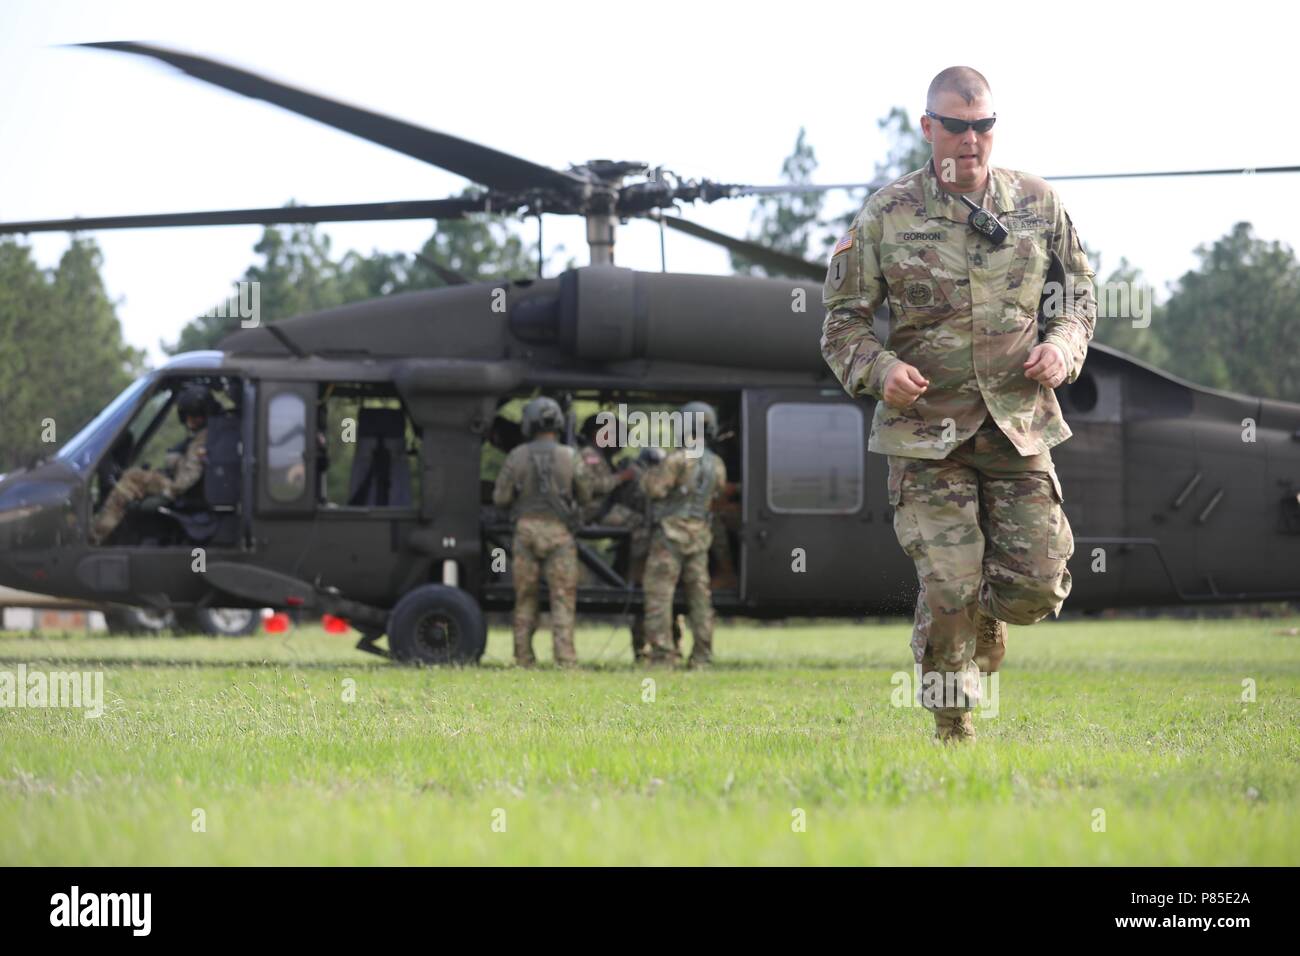 A cadre member departs from the UH-60 Black Hawk helicopter during the Operation Order Event at the 2018 U.S. Army Reserve Best Warrior Competition at Fort Bragg, North Carolina, June 13, 2018, June 13, 2018. U.S. Army Reserve Soldiers compete all day and into the night, pushing themselves at every event during the six-day 2018 U.S. Army Reserve Best Warrior Competition. (U.S. Army Reserve photo by Spc. Devin A. Patterson) (Released). () Stock Photo